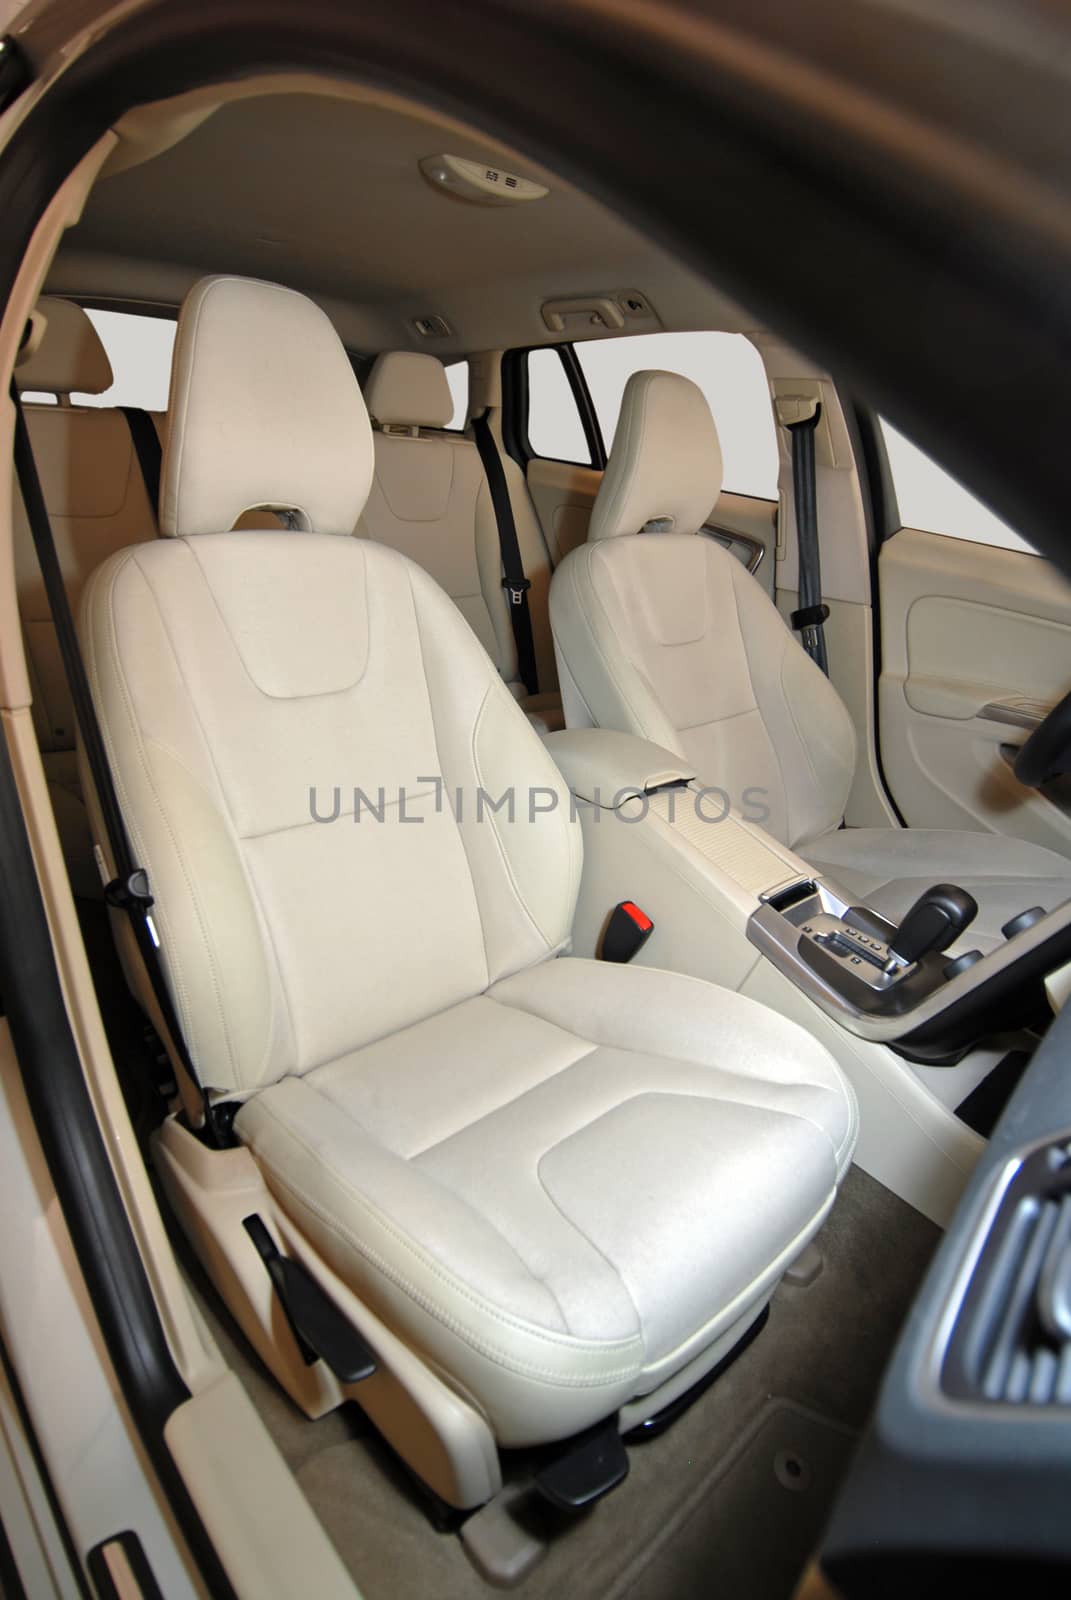 front seats in a car made of white-coated leather